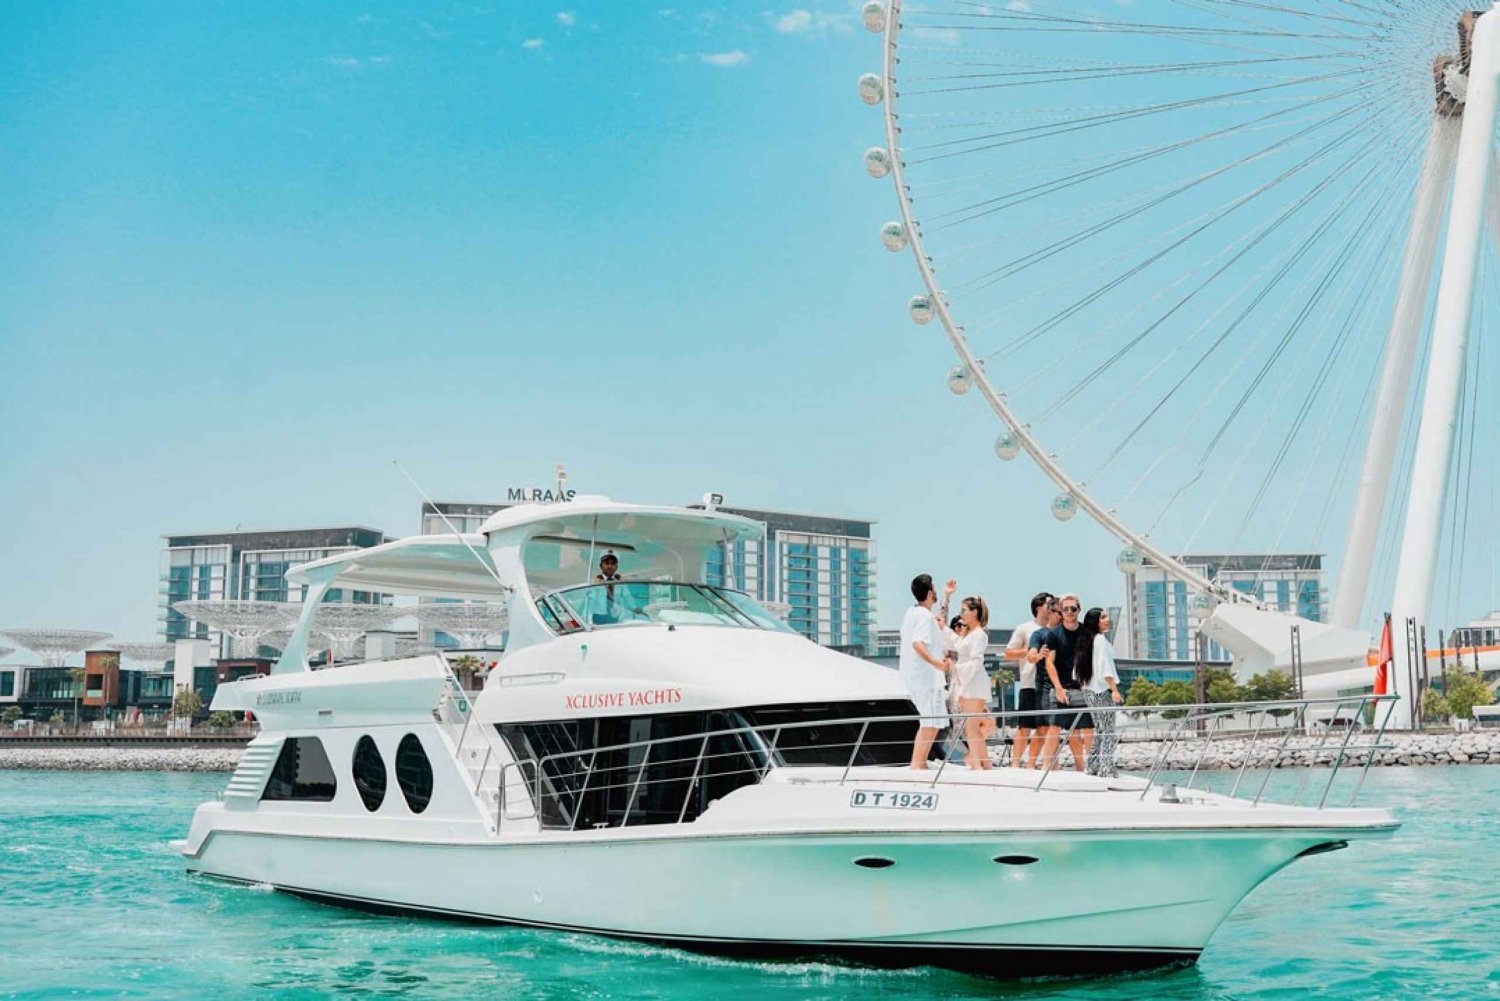 Dubai: Harbor Yacht Tour with BBQ Meal and Drinks